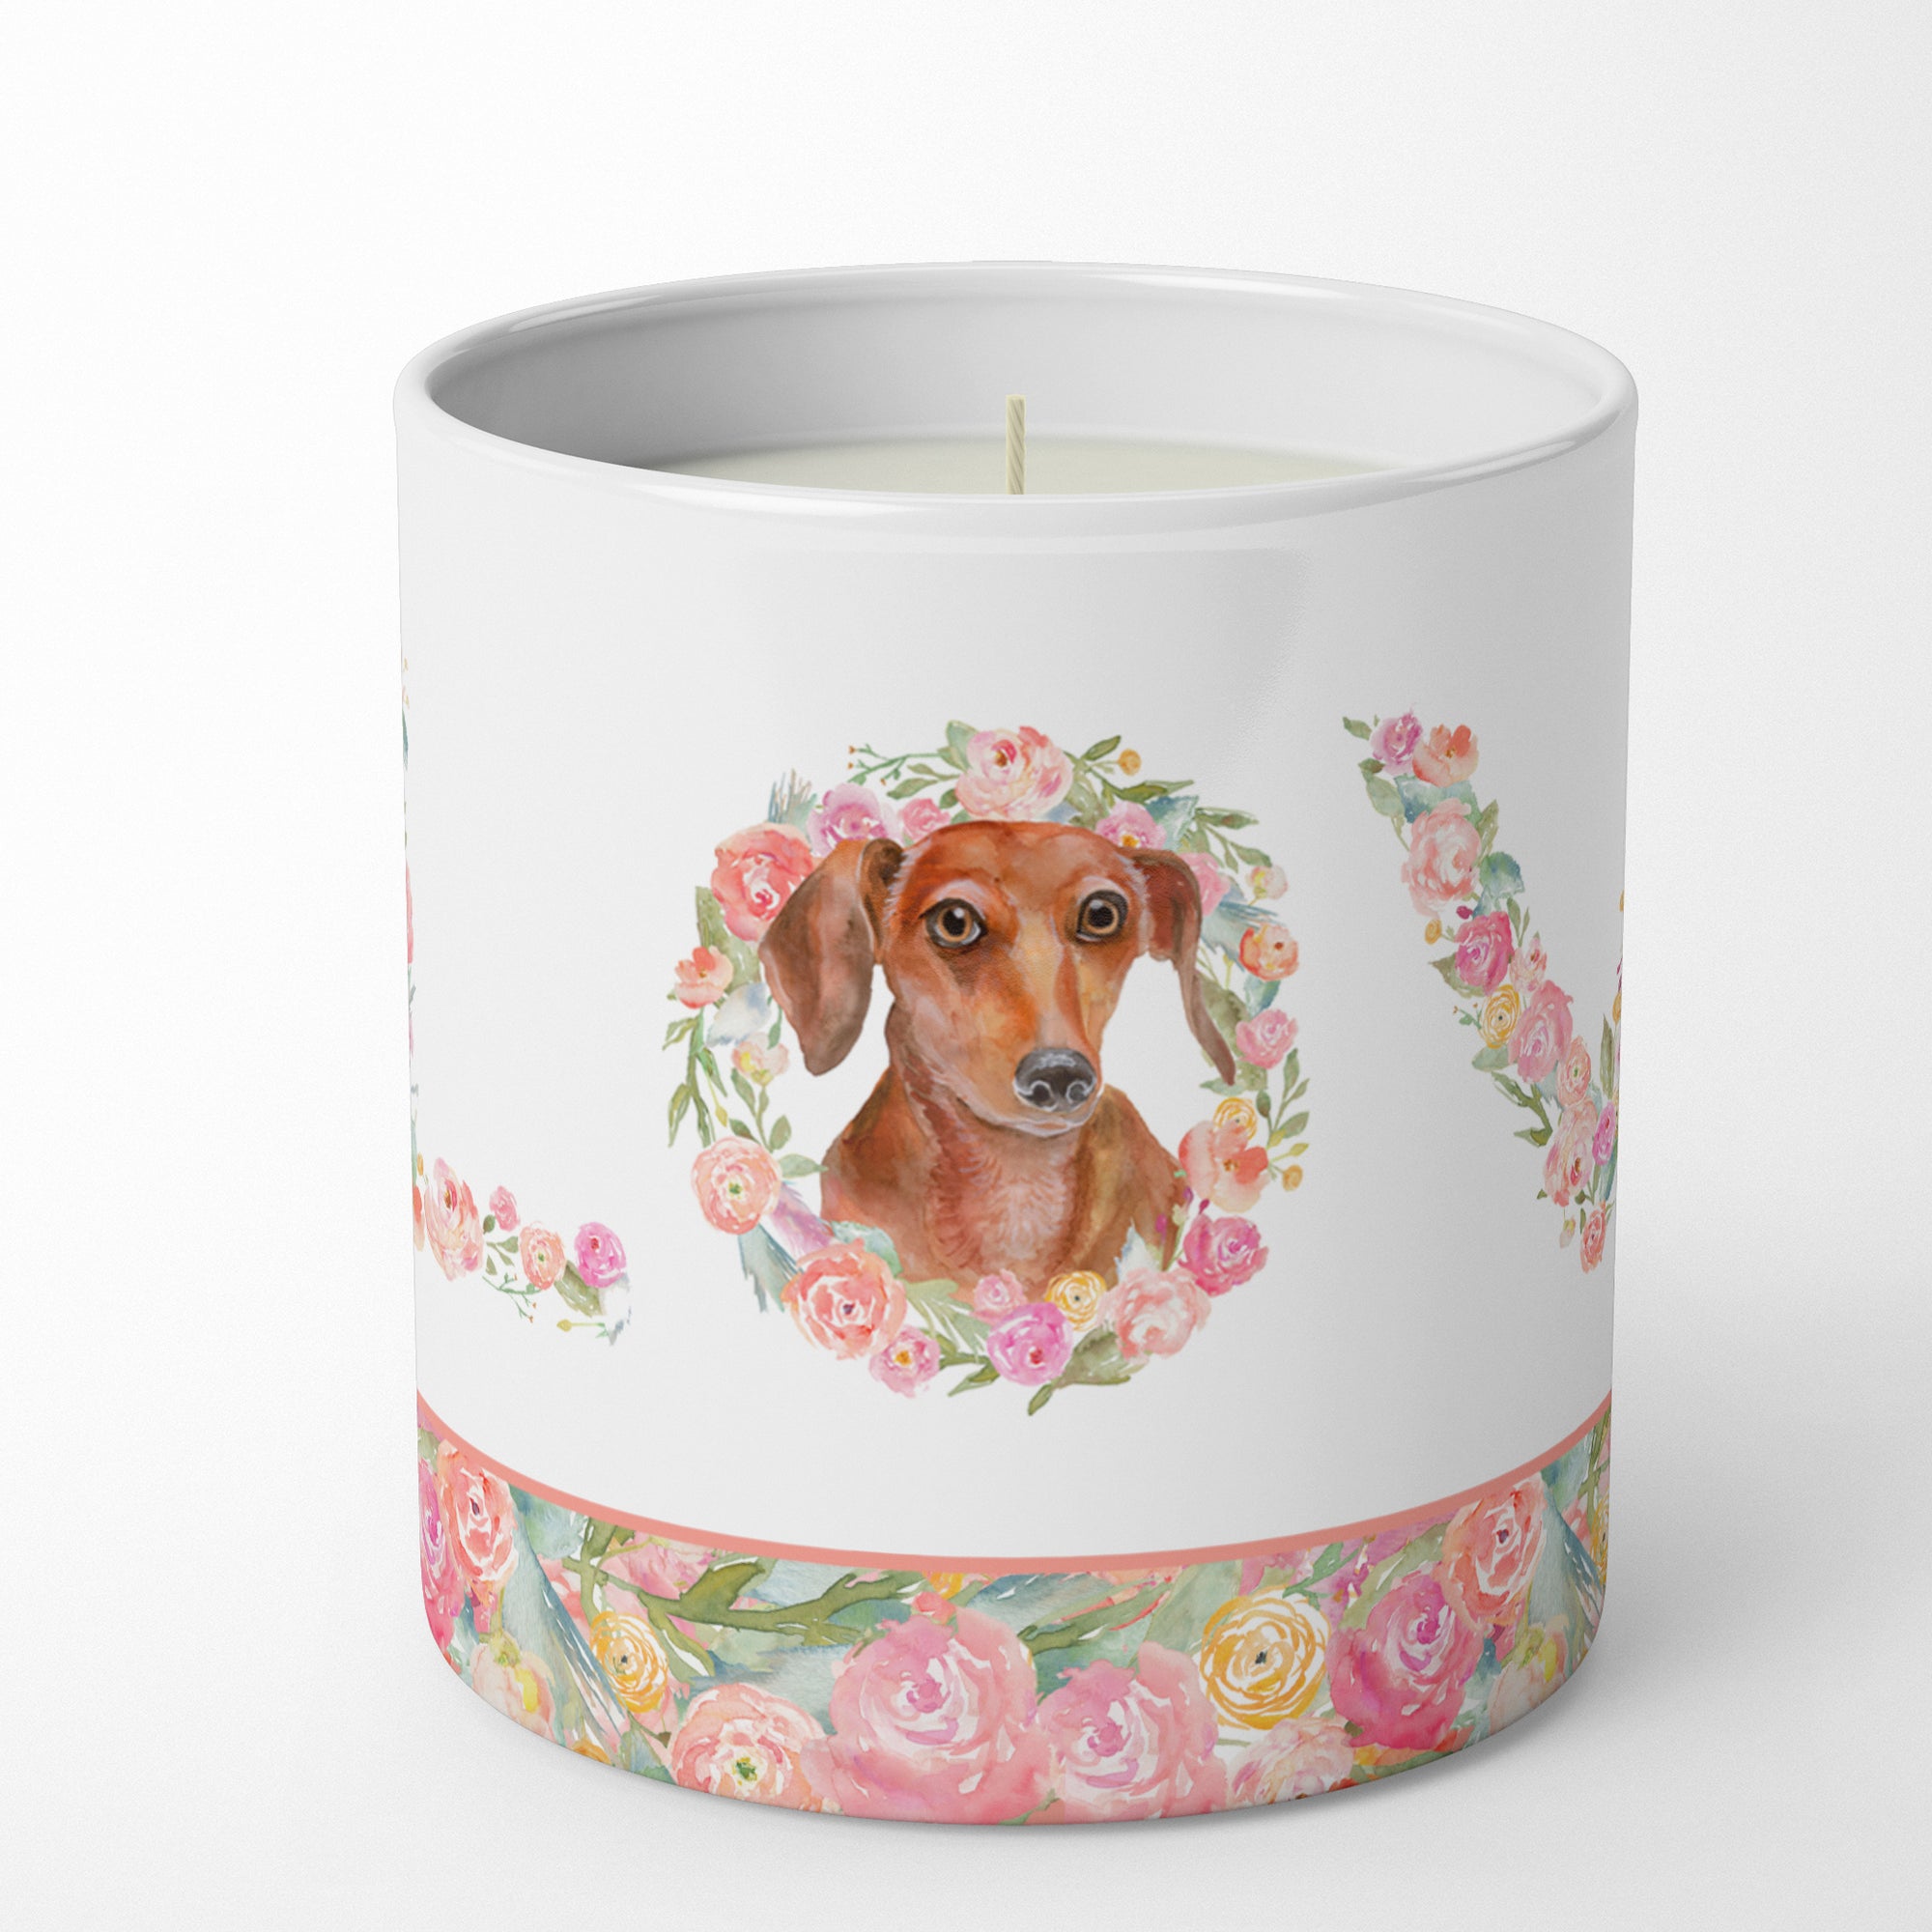 Buy this Dachshund Love 10 oz Decorative Soy Candle